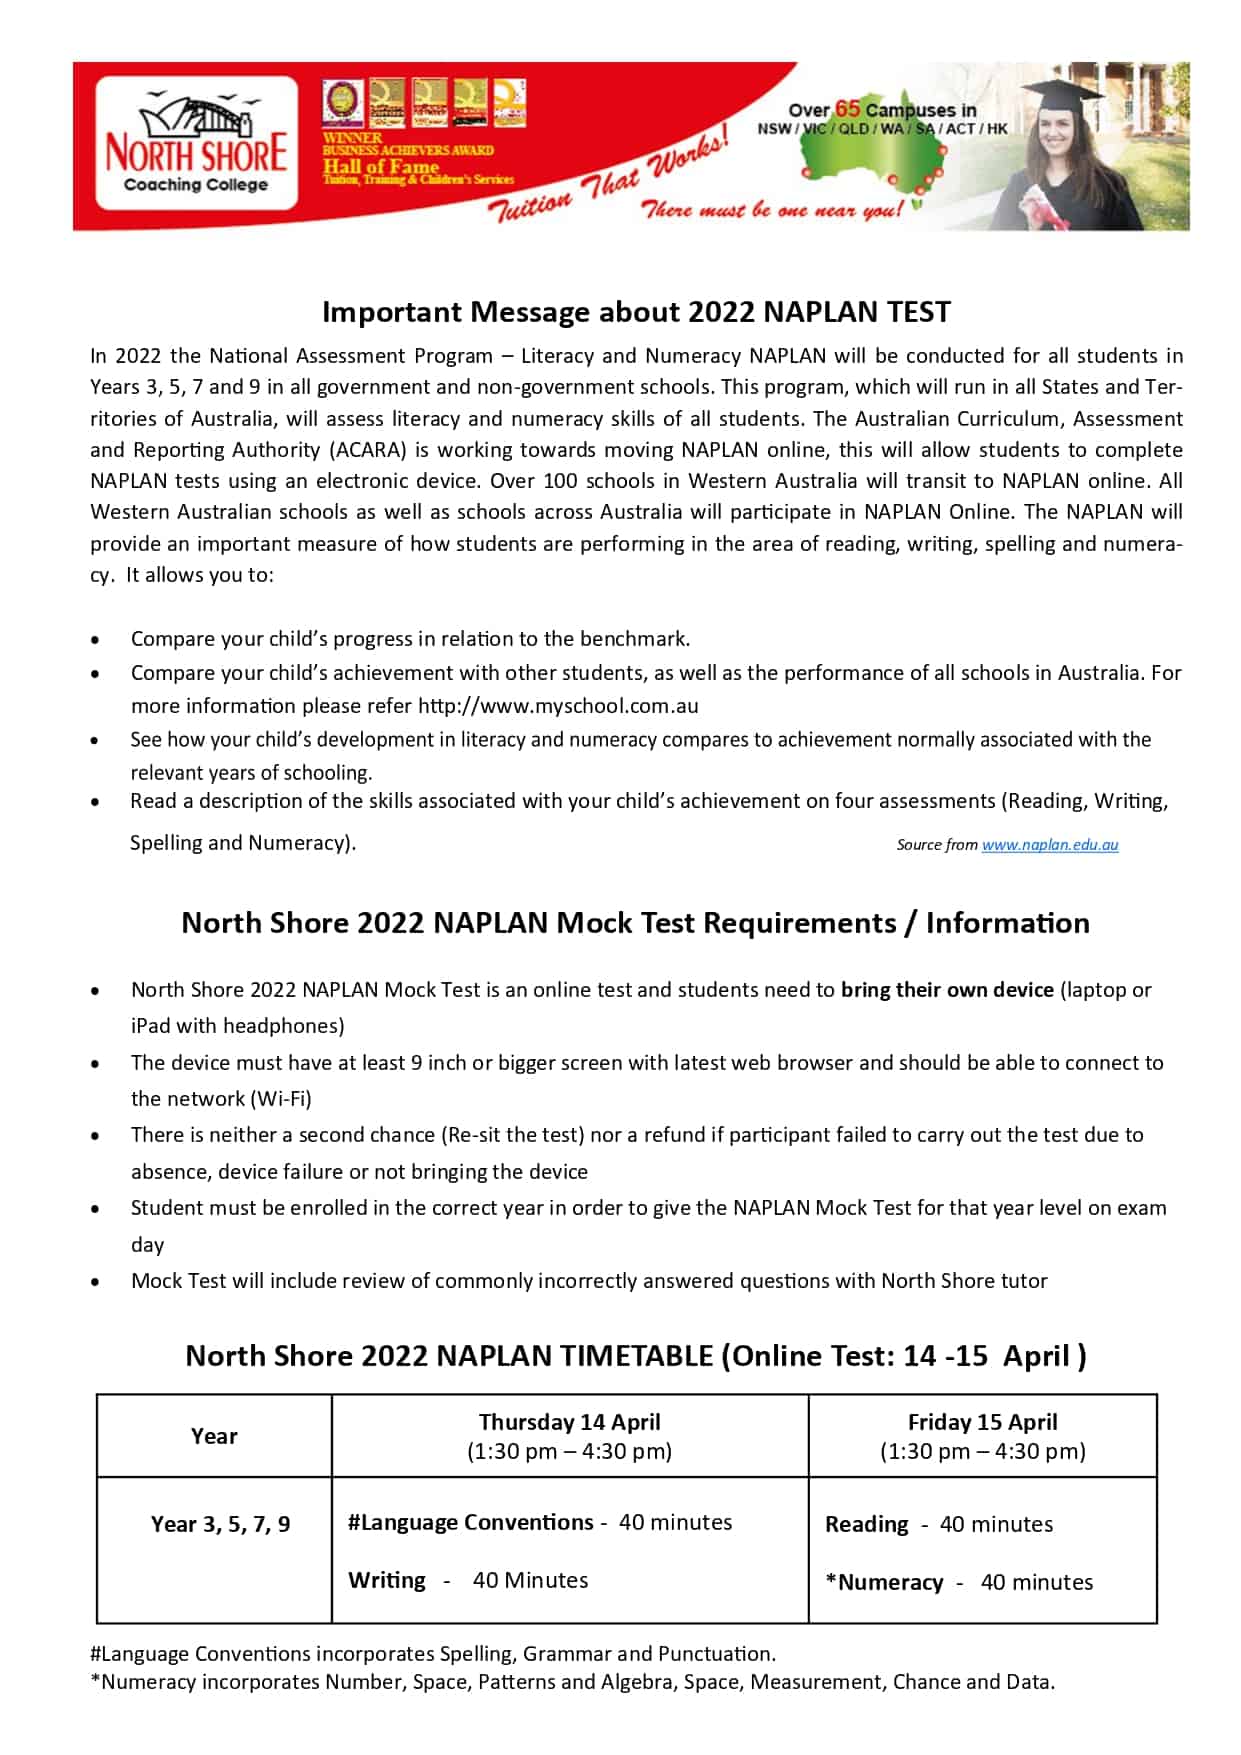 Important Message about 2022 Naplan Test